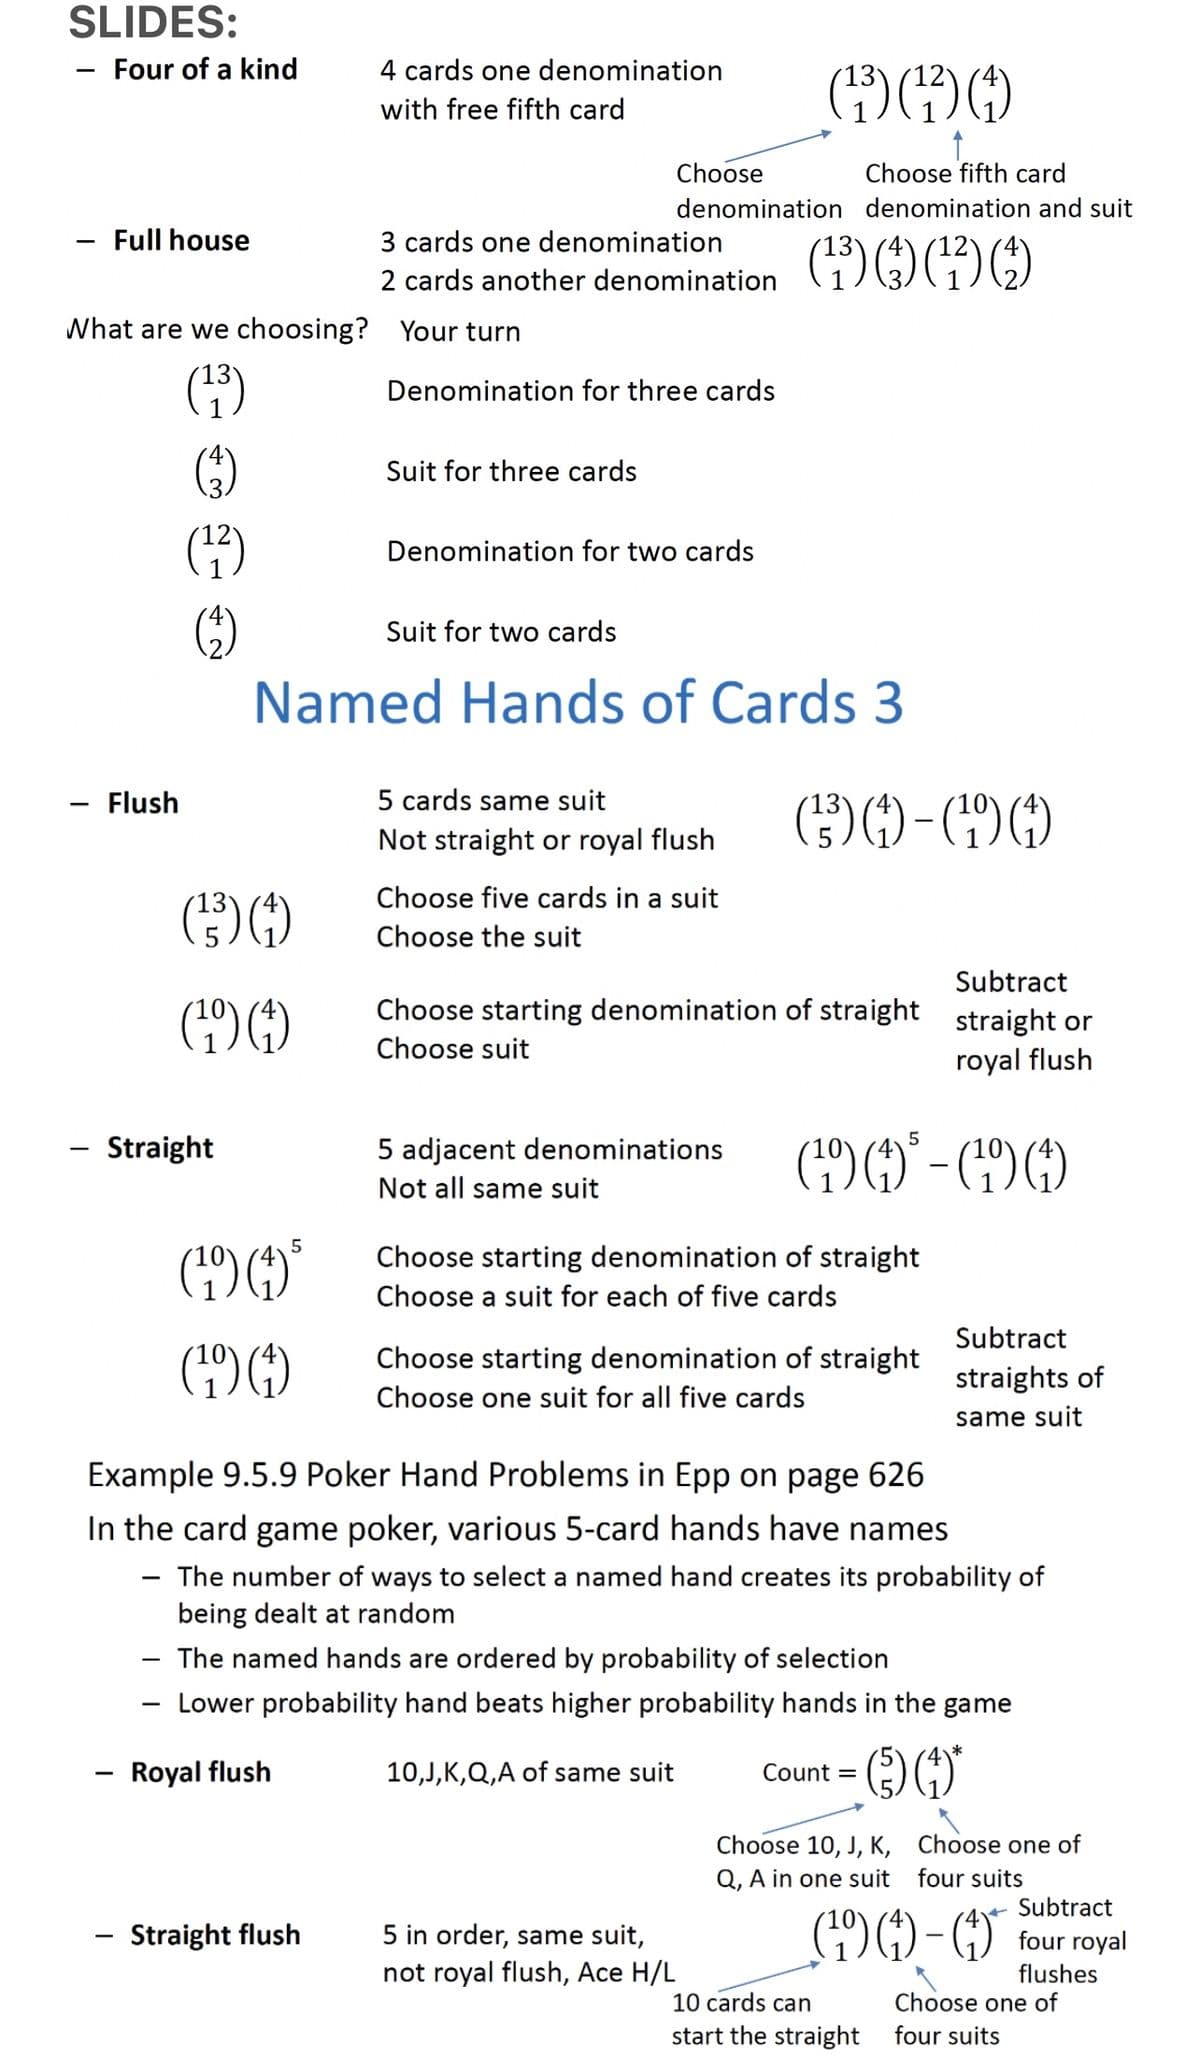 SLIDES:
-
Four of a kind
Full house
Flush
What are we choosing? Your turn
(¹3)
(¹2)
(33)()
(¹9) (4)
Straight
5
4 cards one denomination
with free fifth card
(19)9)
(¹9) (4)
3 cards one denomination
2 cards another denomination (¹3)(3)(¹)()
Denomination for three cards
Suit for three cards
Straight flush
Choose
Choose fifth card
denomination denomination and suit
Suit for two cards
Named Hands of Cards 3
Denomination for two cards
5 cards same suit
Not straight or royal flush
(30)
Choose five cards in a suit
Choose the suit
5 adjacent denominations
Not all same suit
13
Subtract
Choose starting denomination of straight straight or
Choose suit
royal flush
(34)-(0)
5
(¹9) (4) ³ - (94)
Choose starting denomination of straight
Choose a suit for each of five cards
5 in order, same suit,
not royal flush, Ace H/L
Choose starting denomination of straight
Choose one suit for all five cards
Example 9.5.9 Poker Hand Problems in Epp on page 626
In the card game poker, various 5-card hands have names
The number of ways to select a named hand creates its probability of
being dealt at random
The named hands are ordered by probability of selection
Lower probability hand beats higher probability hands in the game
Royal flush
10,J,K,Q,A of same suit
(*
Count =
Subtract
straights of
same suit
Choose 10, J, K,
Q, A in one suit
10 cards can
start the straight
Choose one of
four suits
(49)0)-(
Subtract
four royal
flushes
Choose one of
four suits